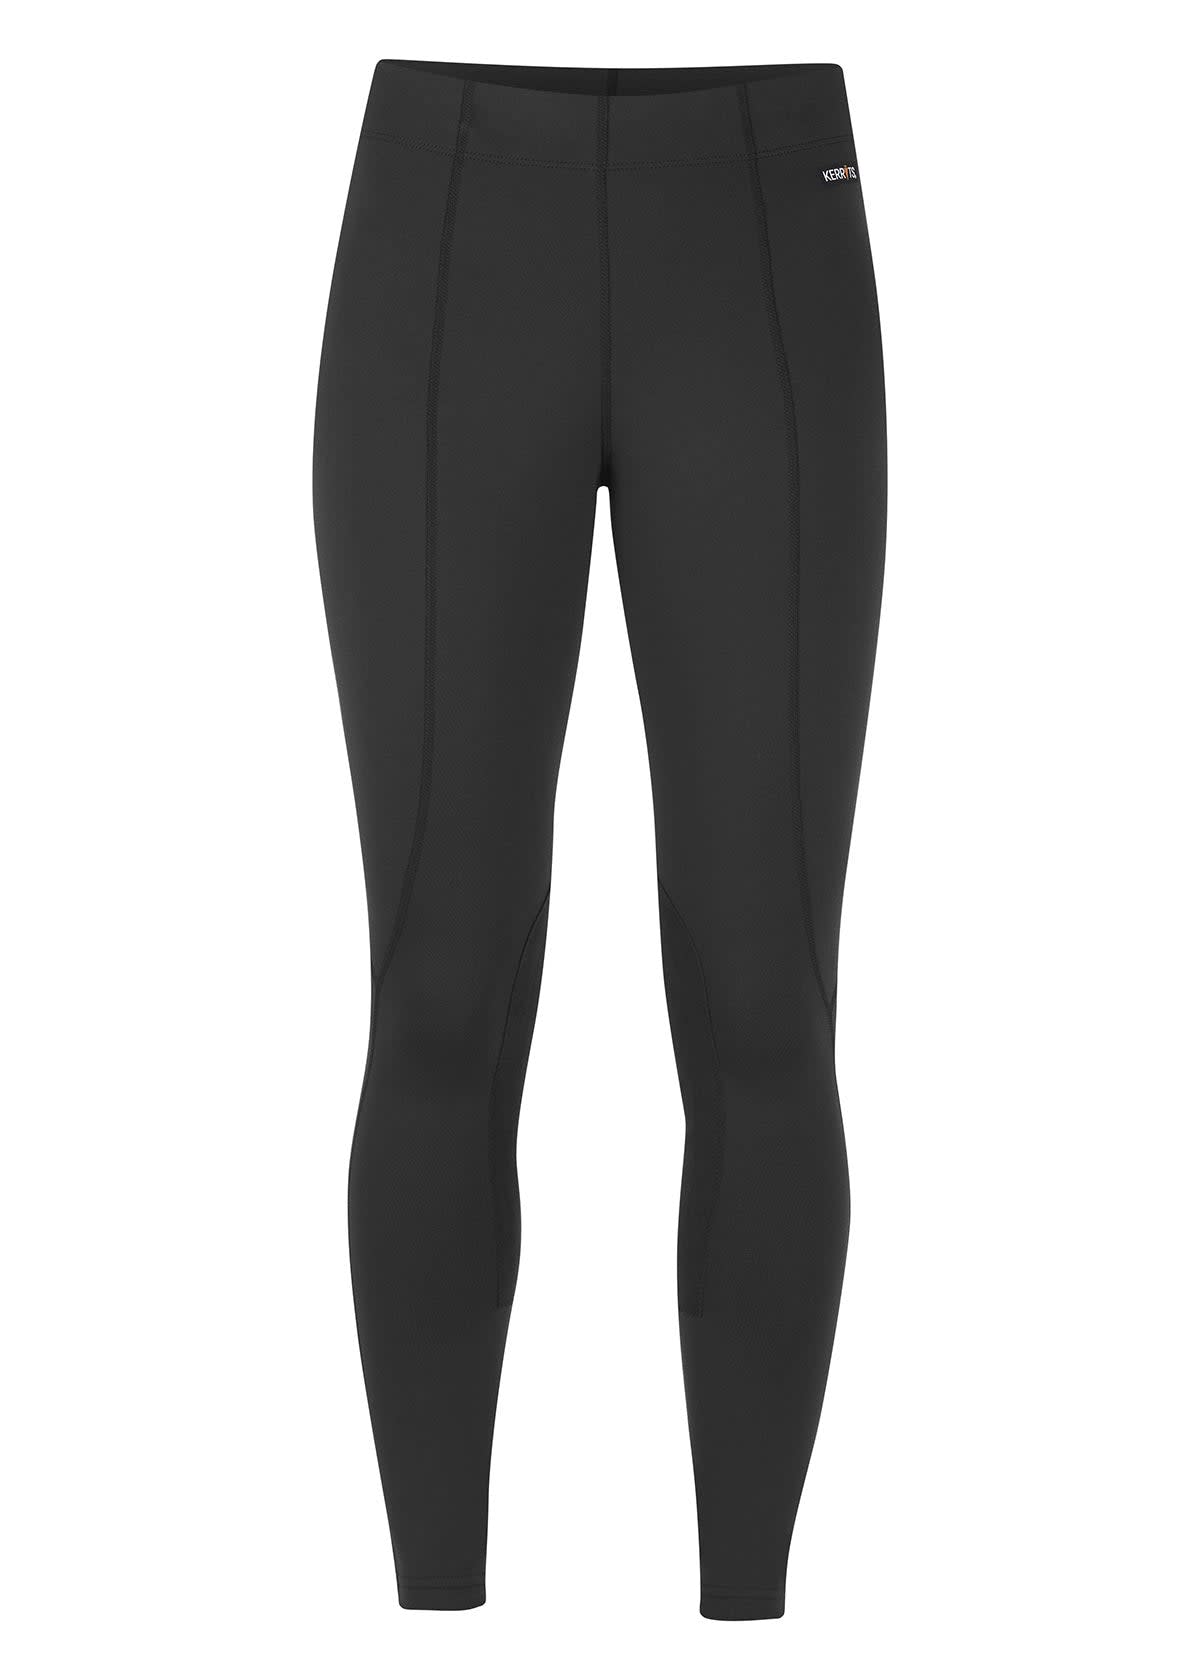 Kerrits Women's Flow Rise Knee Patch Performance Tights - Black ...